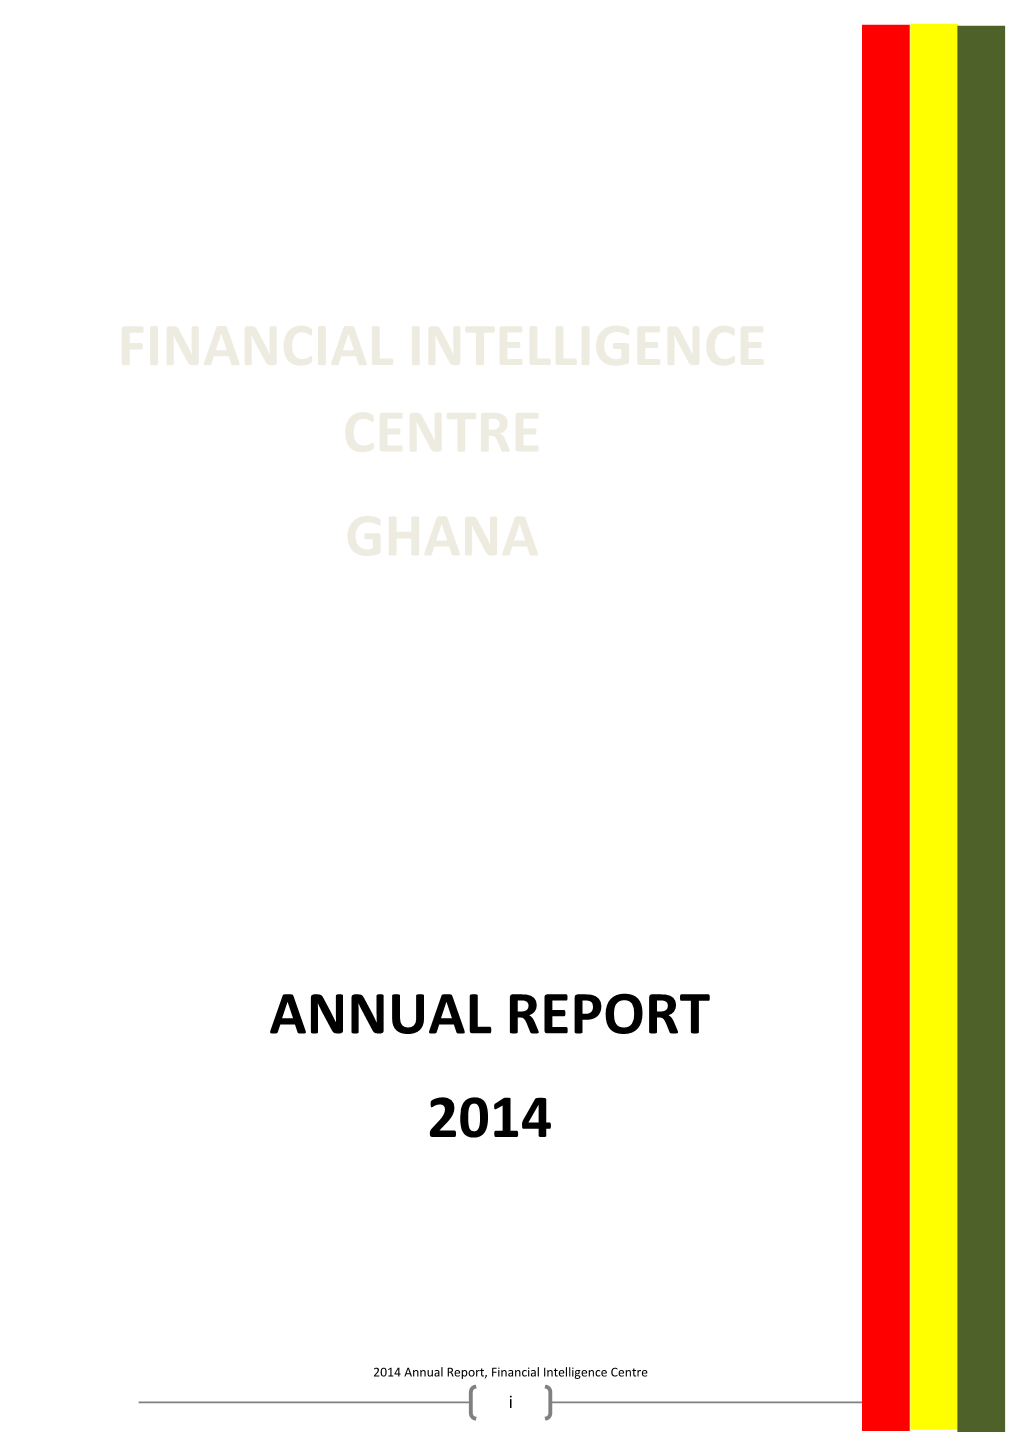 Financial Intelligence Centre Ghana Annual Report 2014